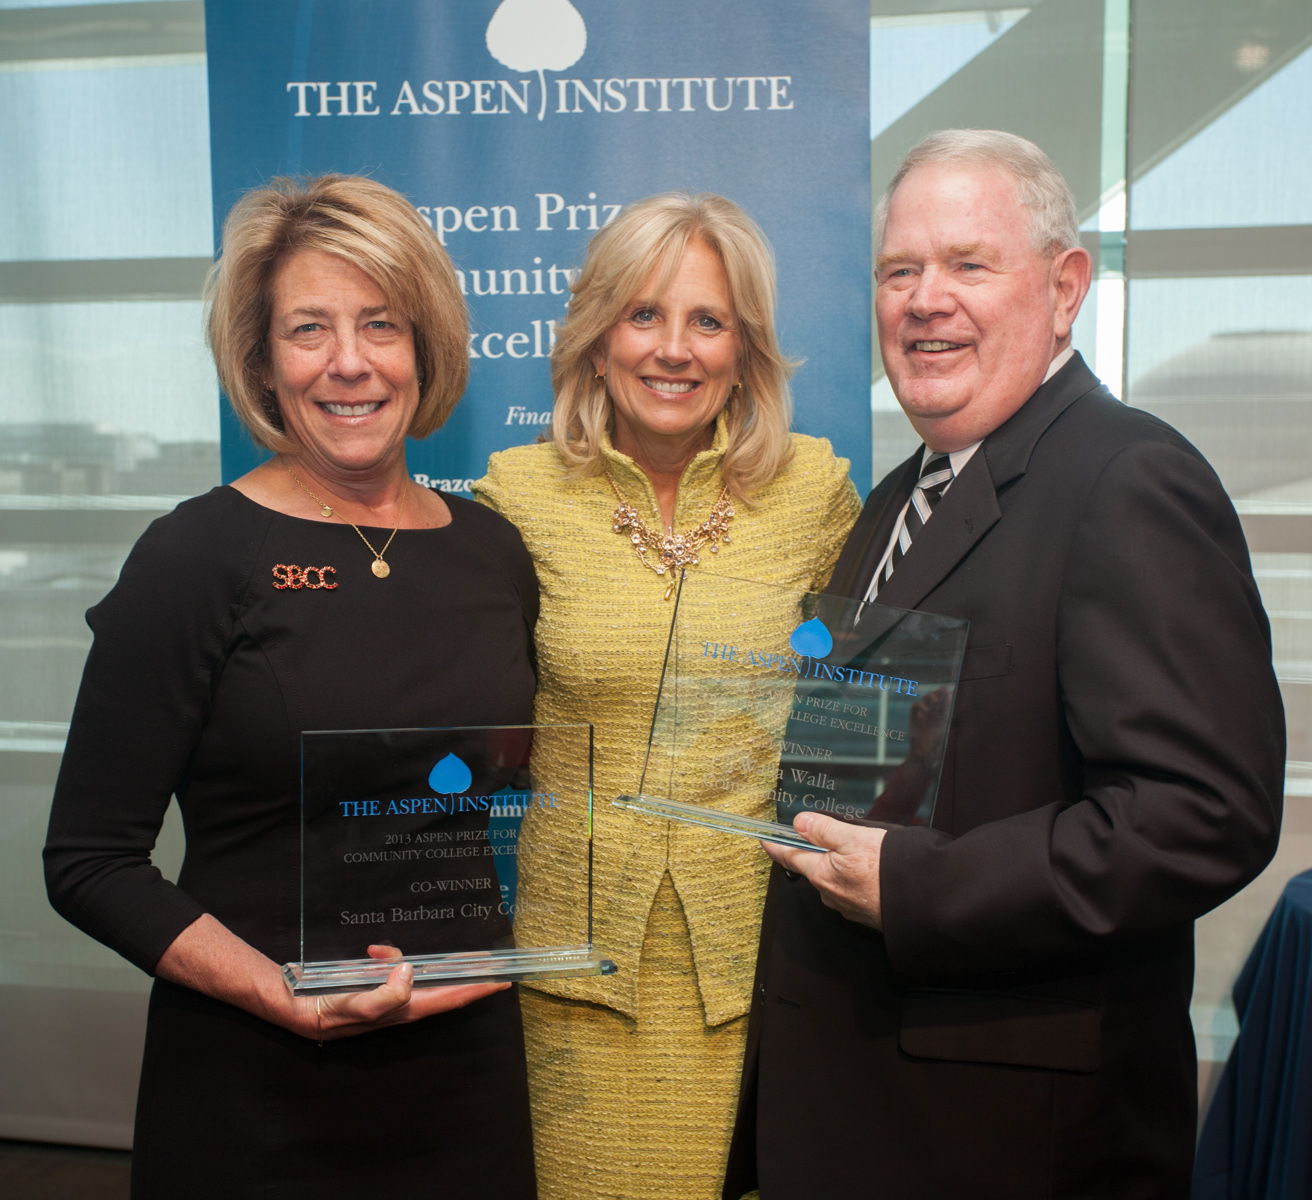 Dr. Jill Biden with the co-winners of the 2013 Aspen Community College Excellence Prize